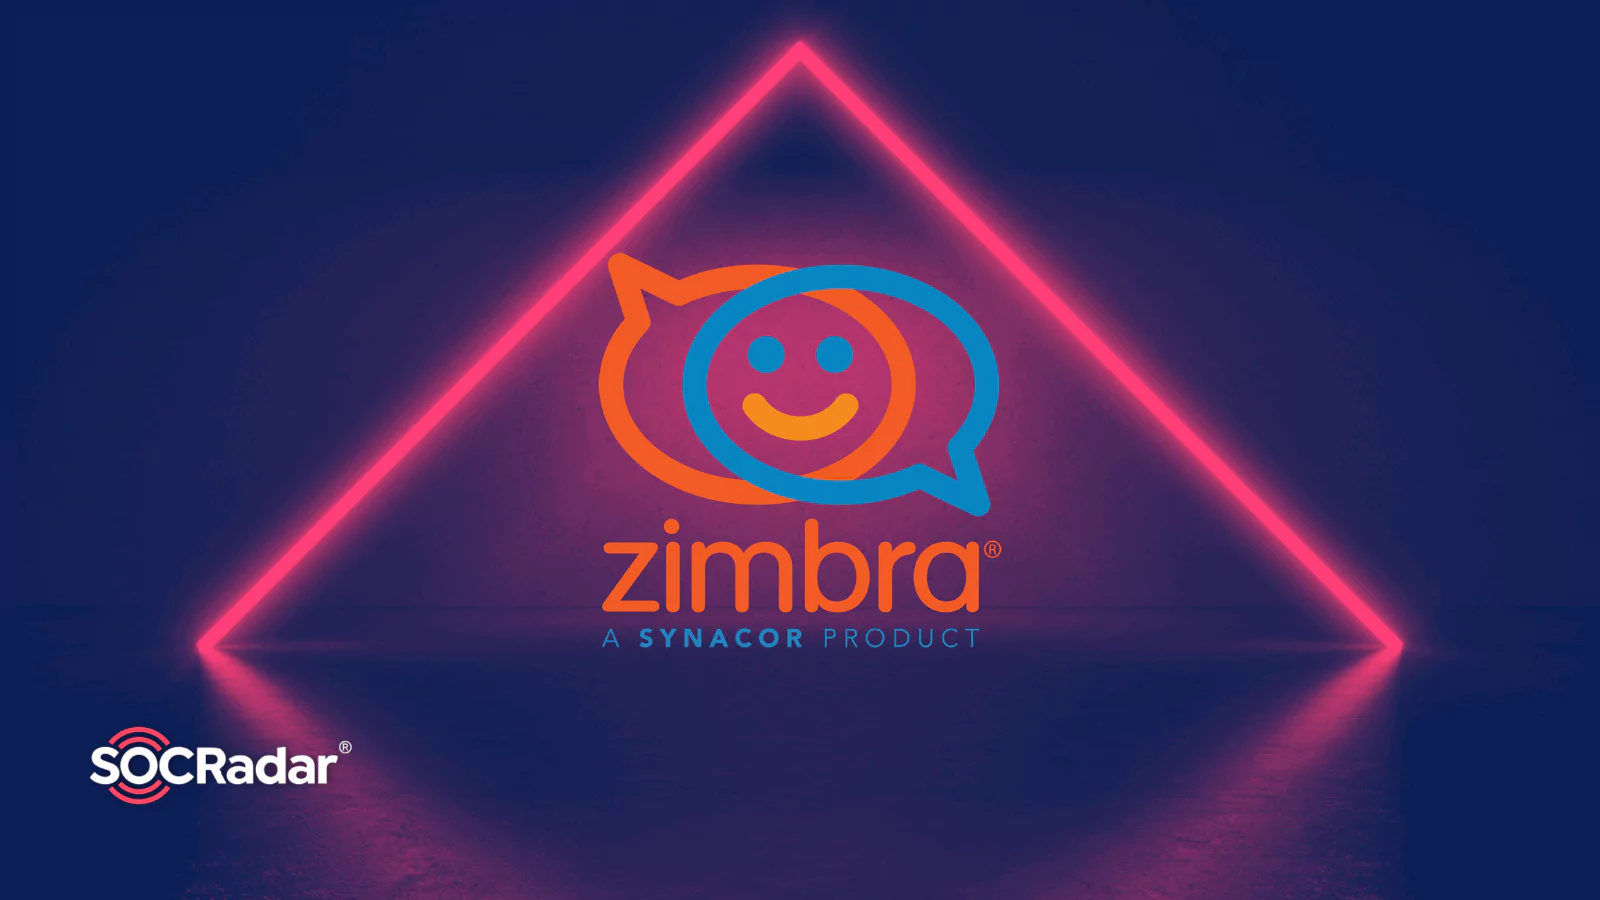 Researchers Flag Zimbra Vulnerability, Company Issues Patch